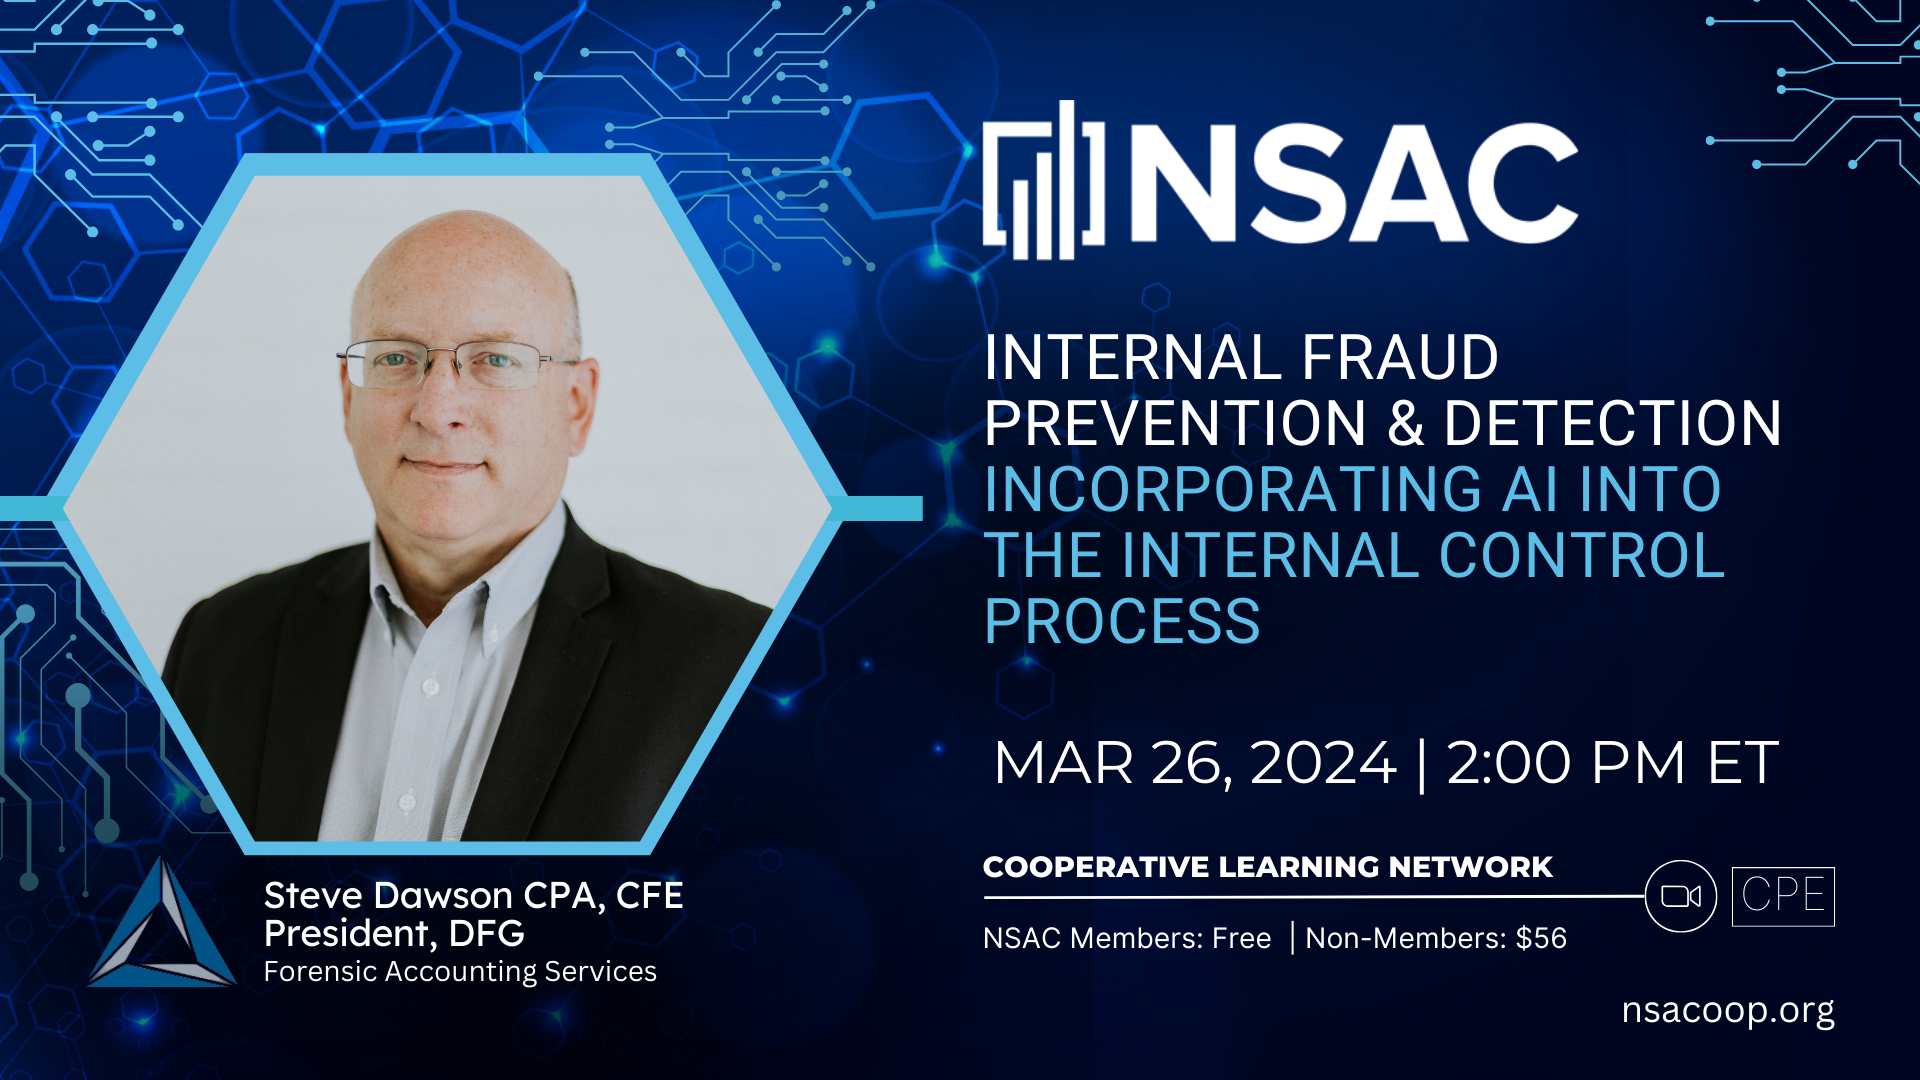 Internal Fraud Prevention and Detection: Incorporating AI into the Internal Control Process